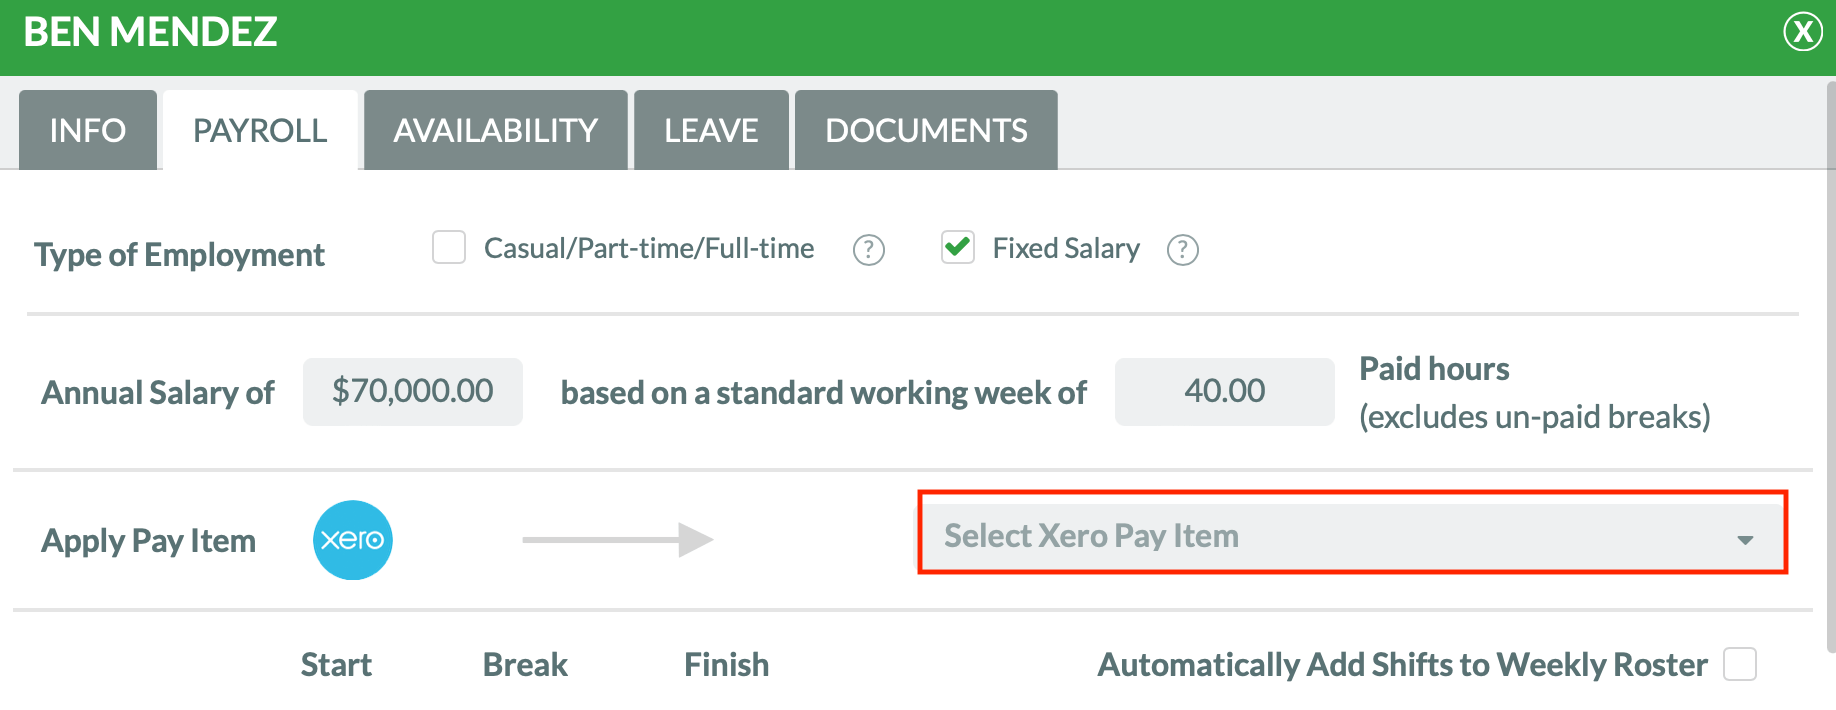 Salary Pay Item.png